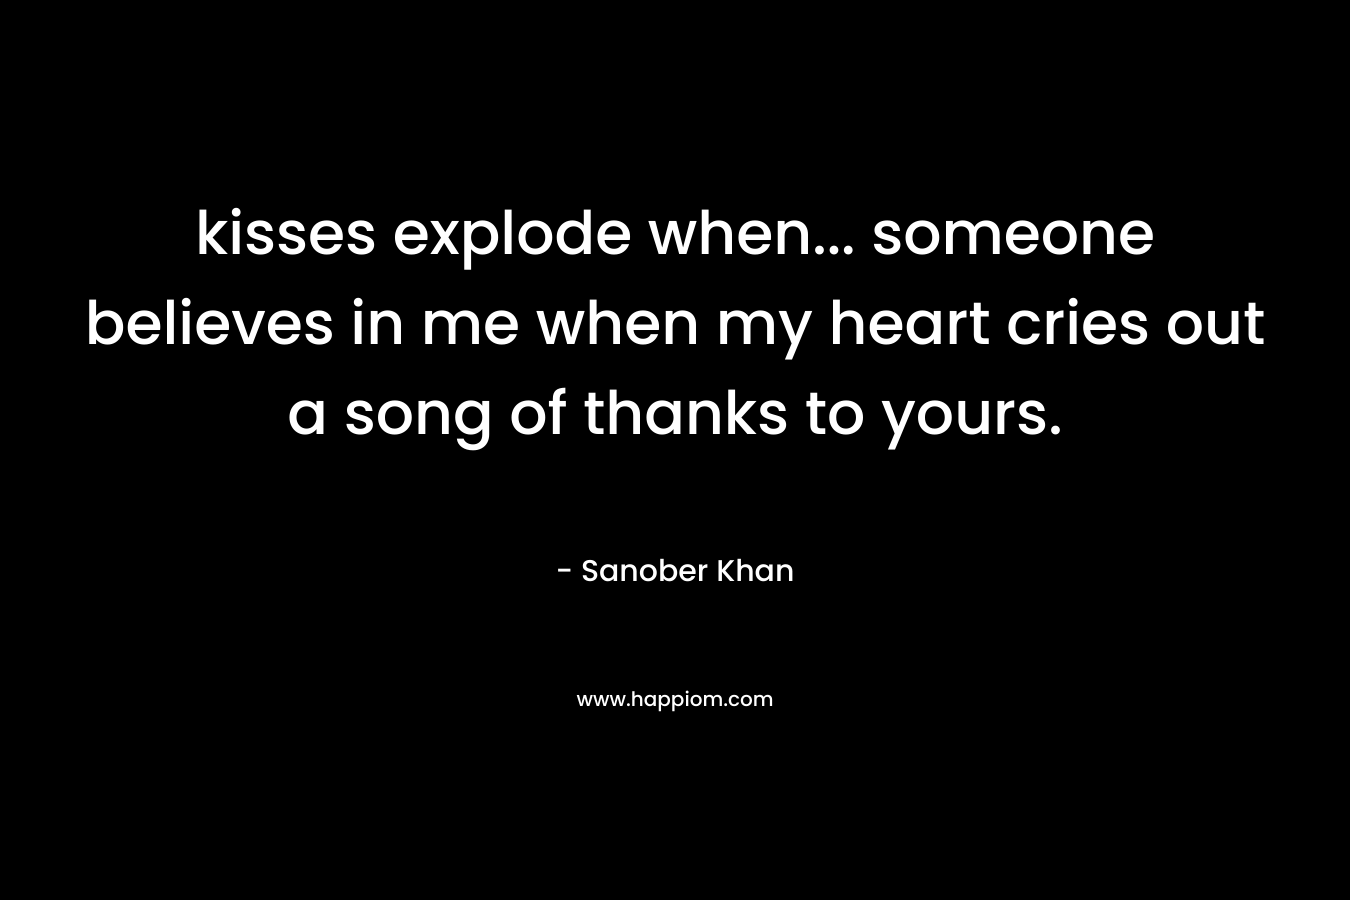 kisses explode when... someone believes in me when my heart cries out a song of thanks to yours.